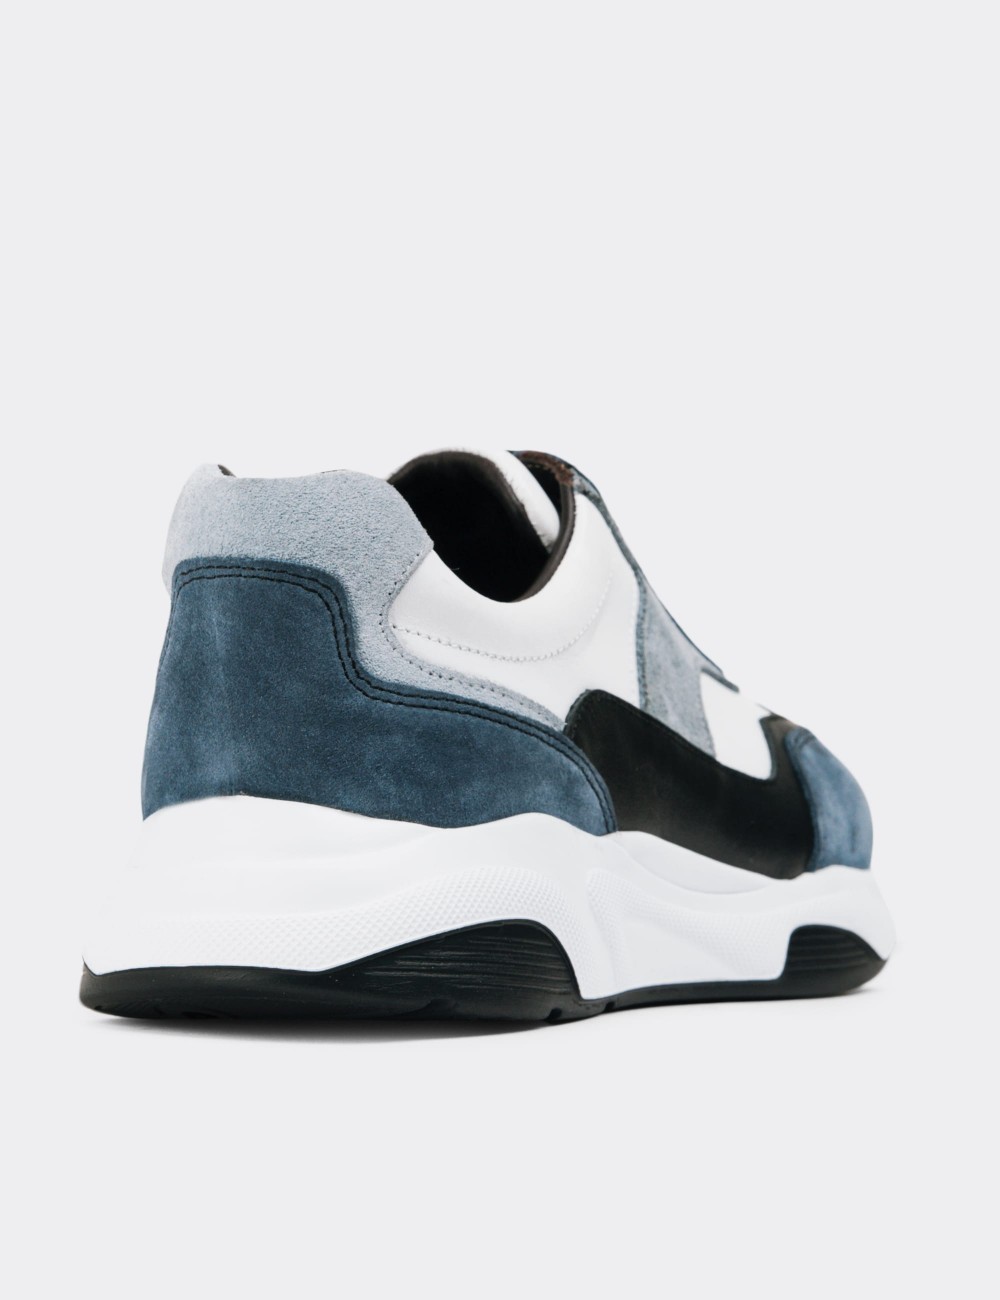 Blue Suede Leather Sneakers - 01890ZMVIE01